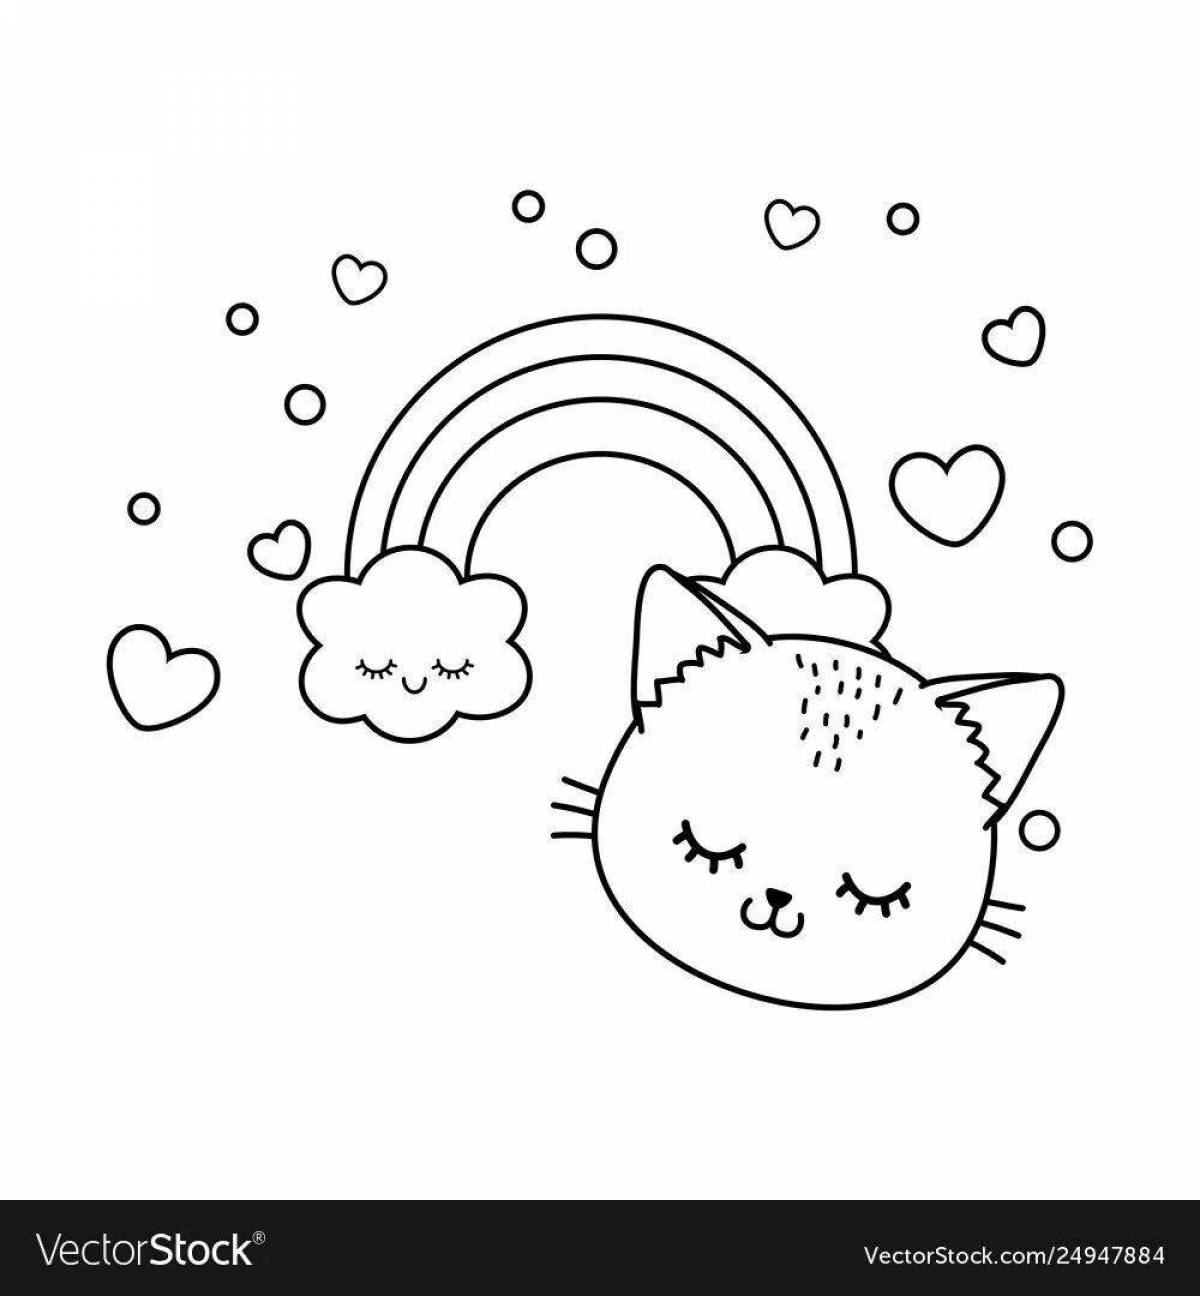 Adorable rainbow cat coloring page